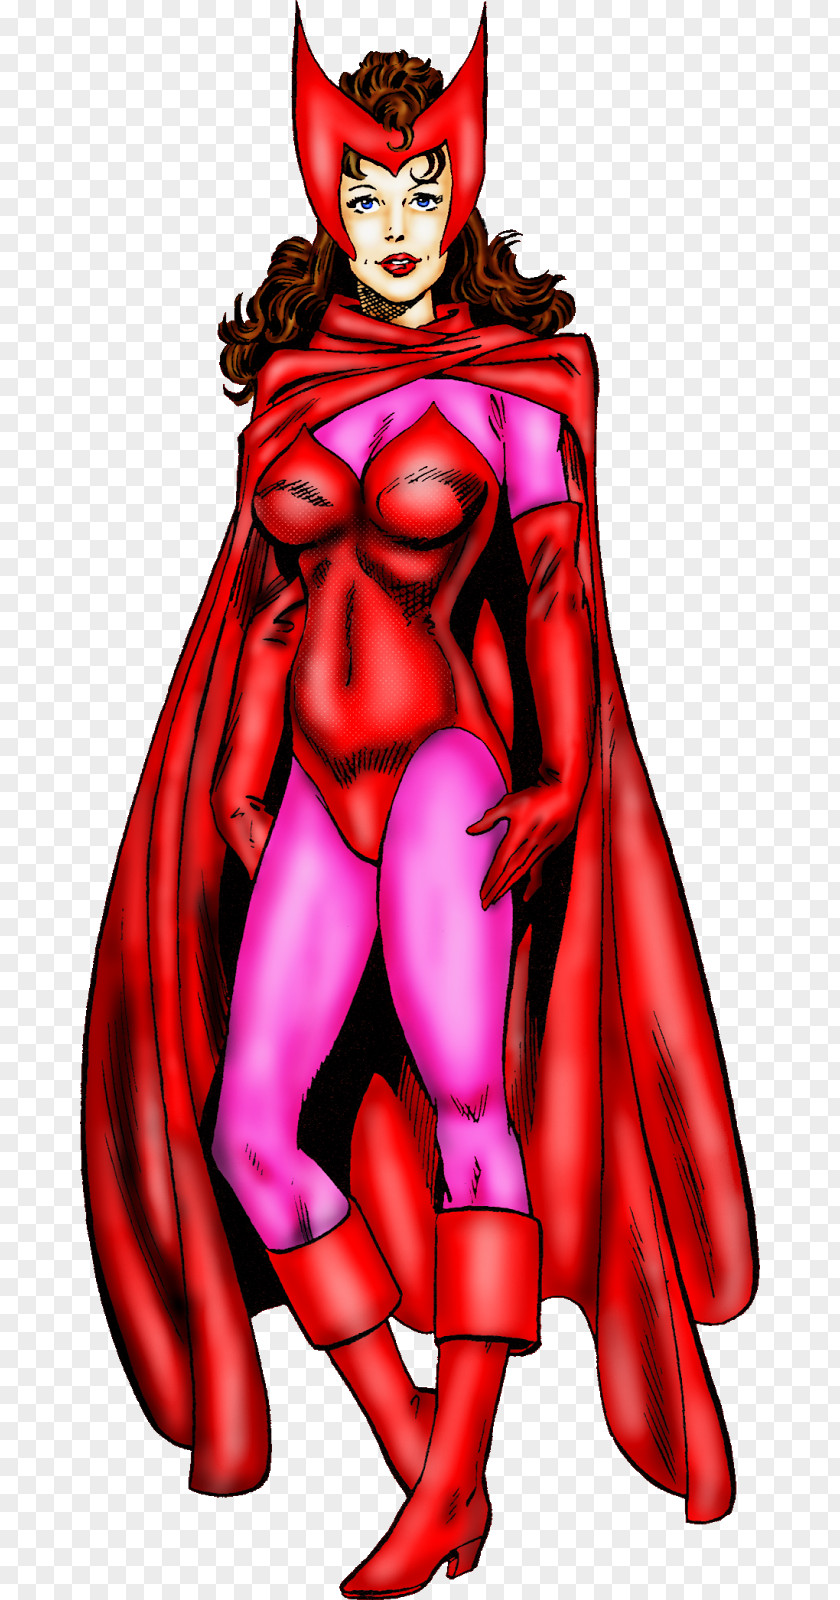 Scarlet Witch Wanda Maximoff Wasp Magneto Quicksilver Iron Man PNG